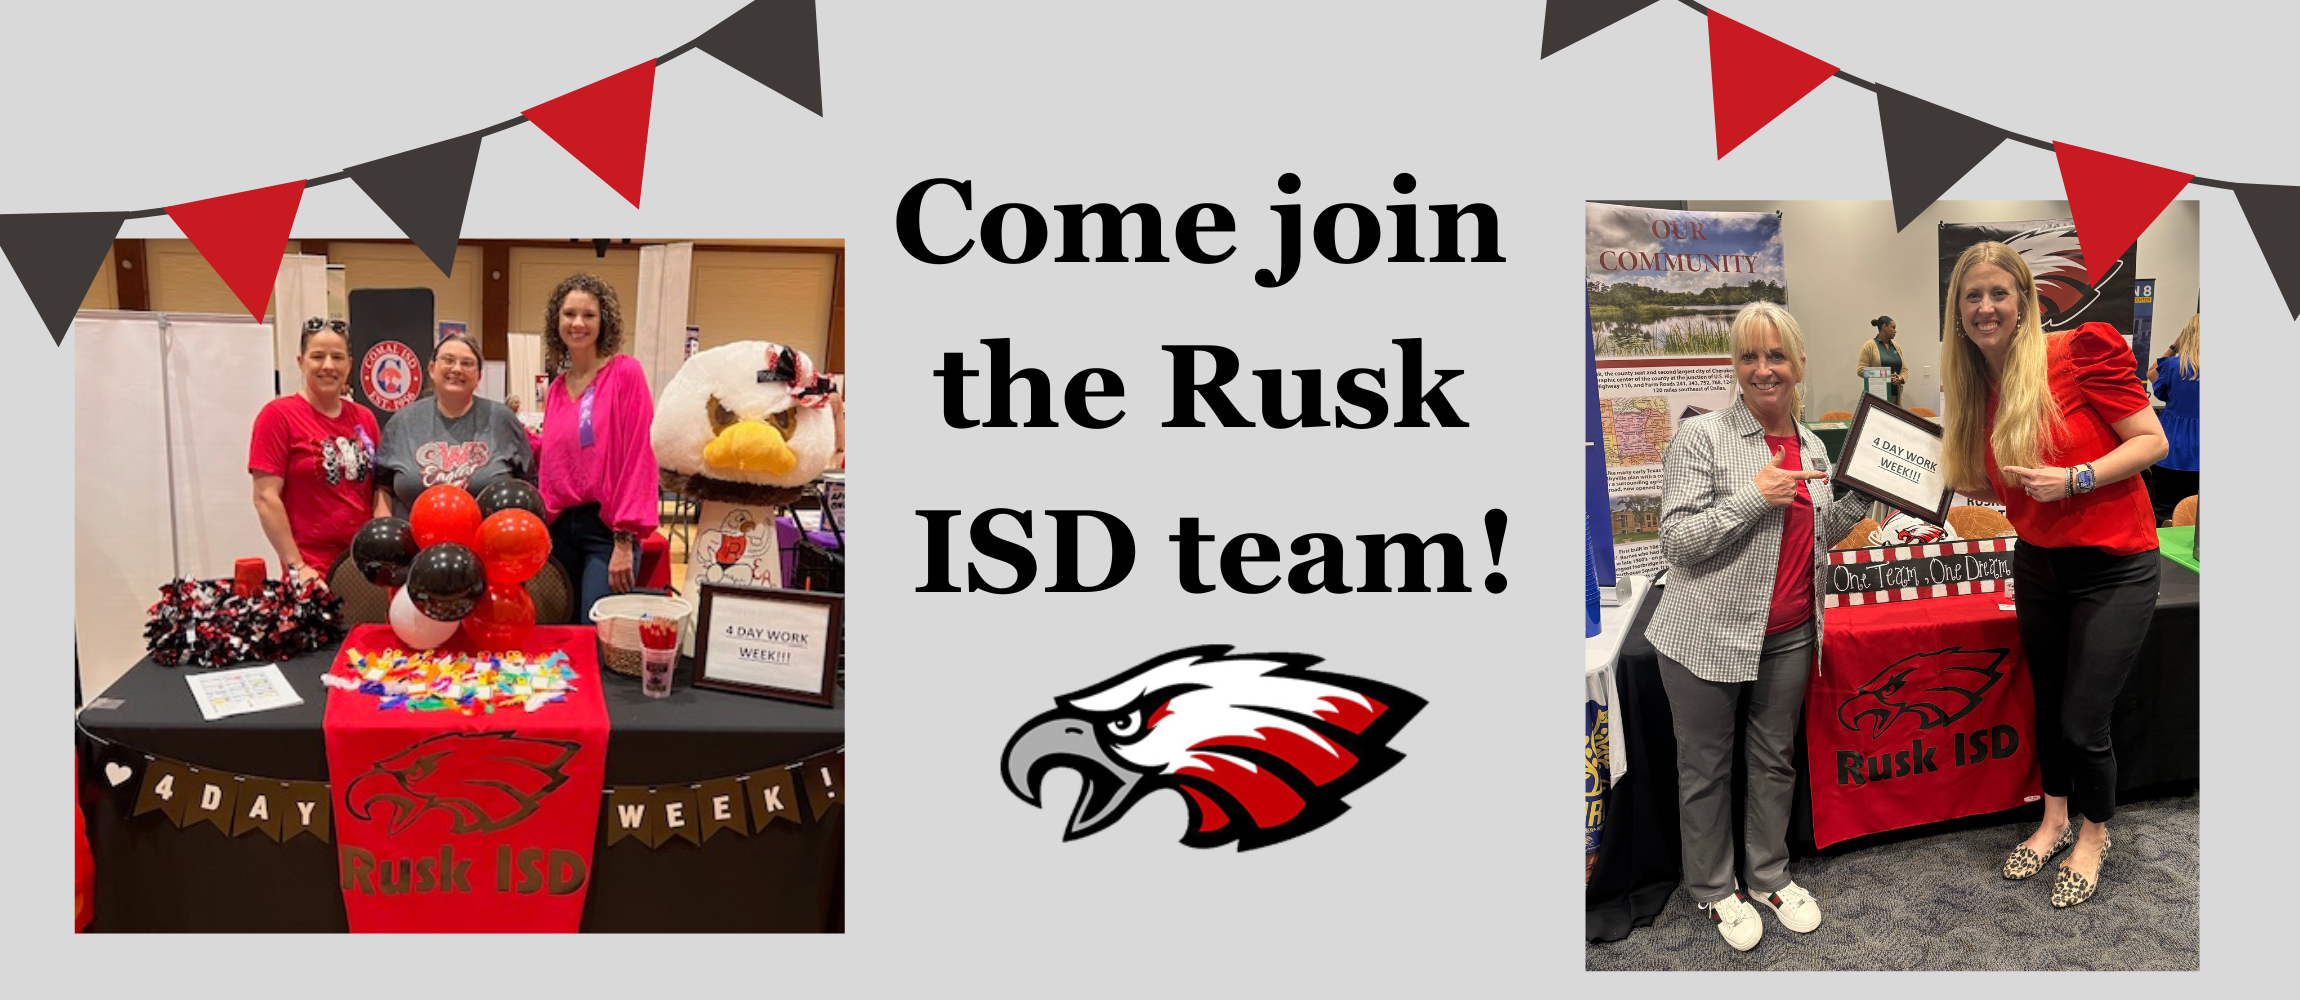 Come join the Rusk ISD team! Pictures of our staff at job fairs